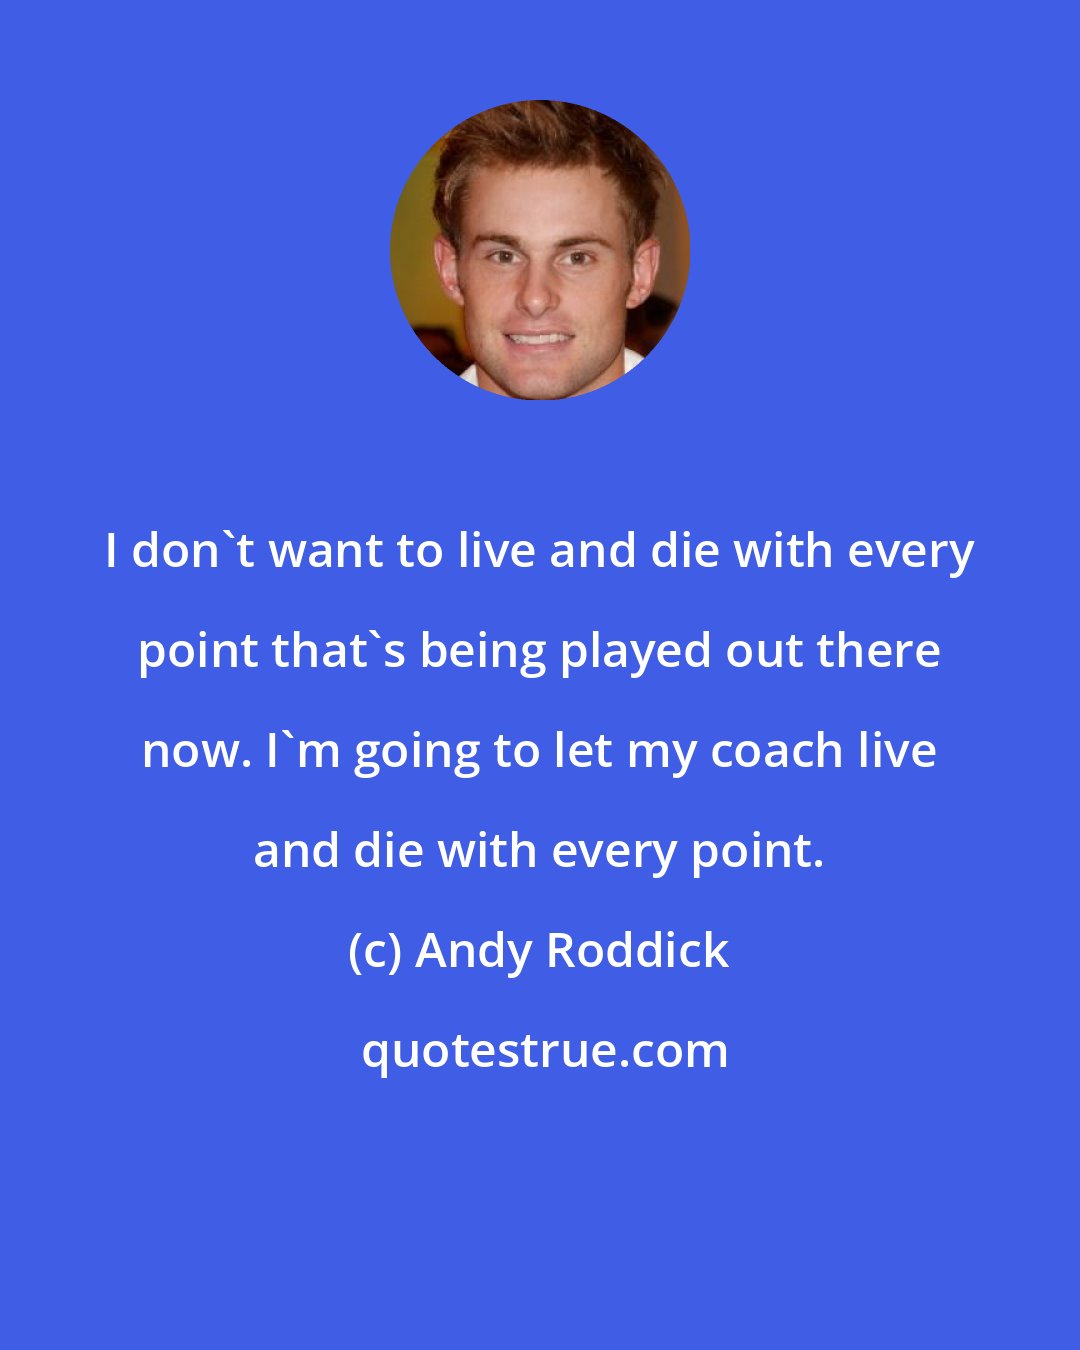 Andy Roddick: I don't want to live and die with every point that's being played out there now. I'm going to let my coach live and die with every point.